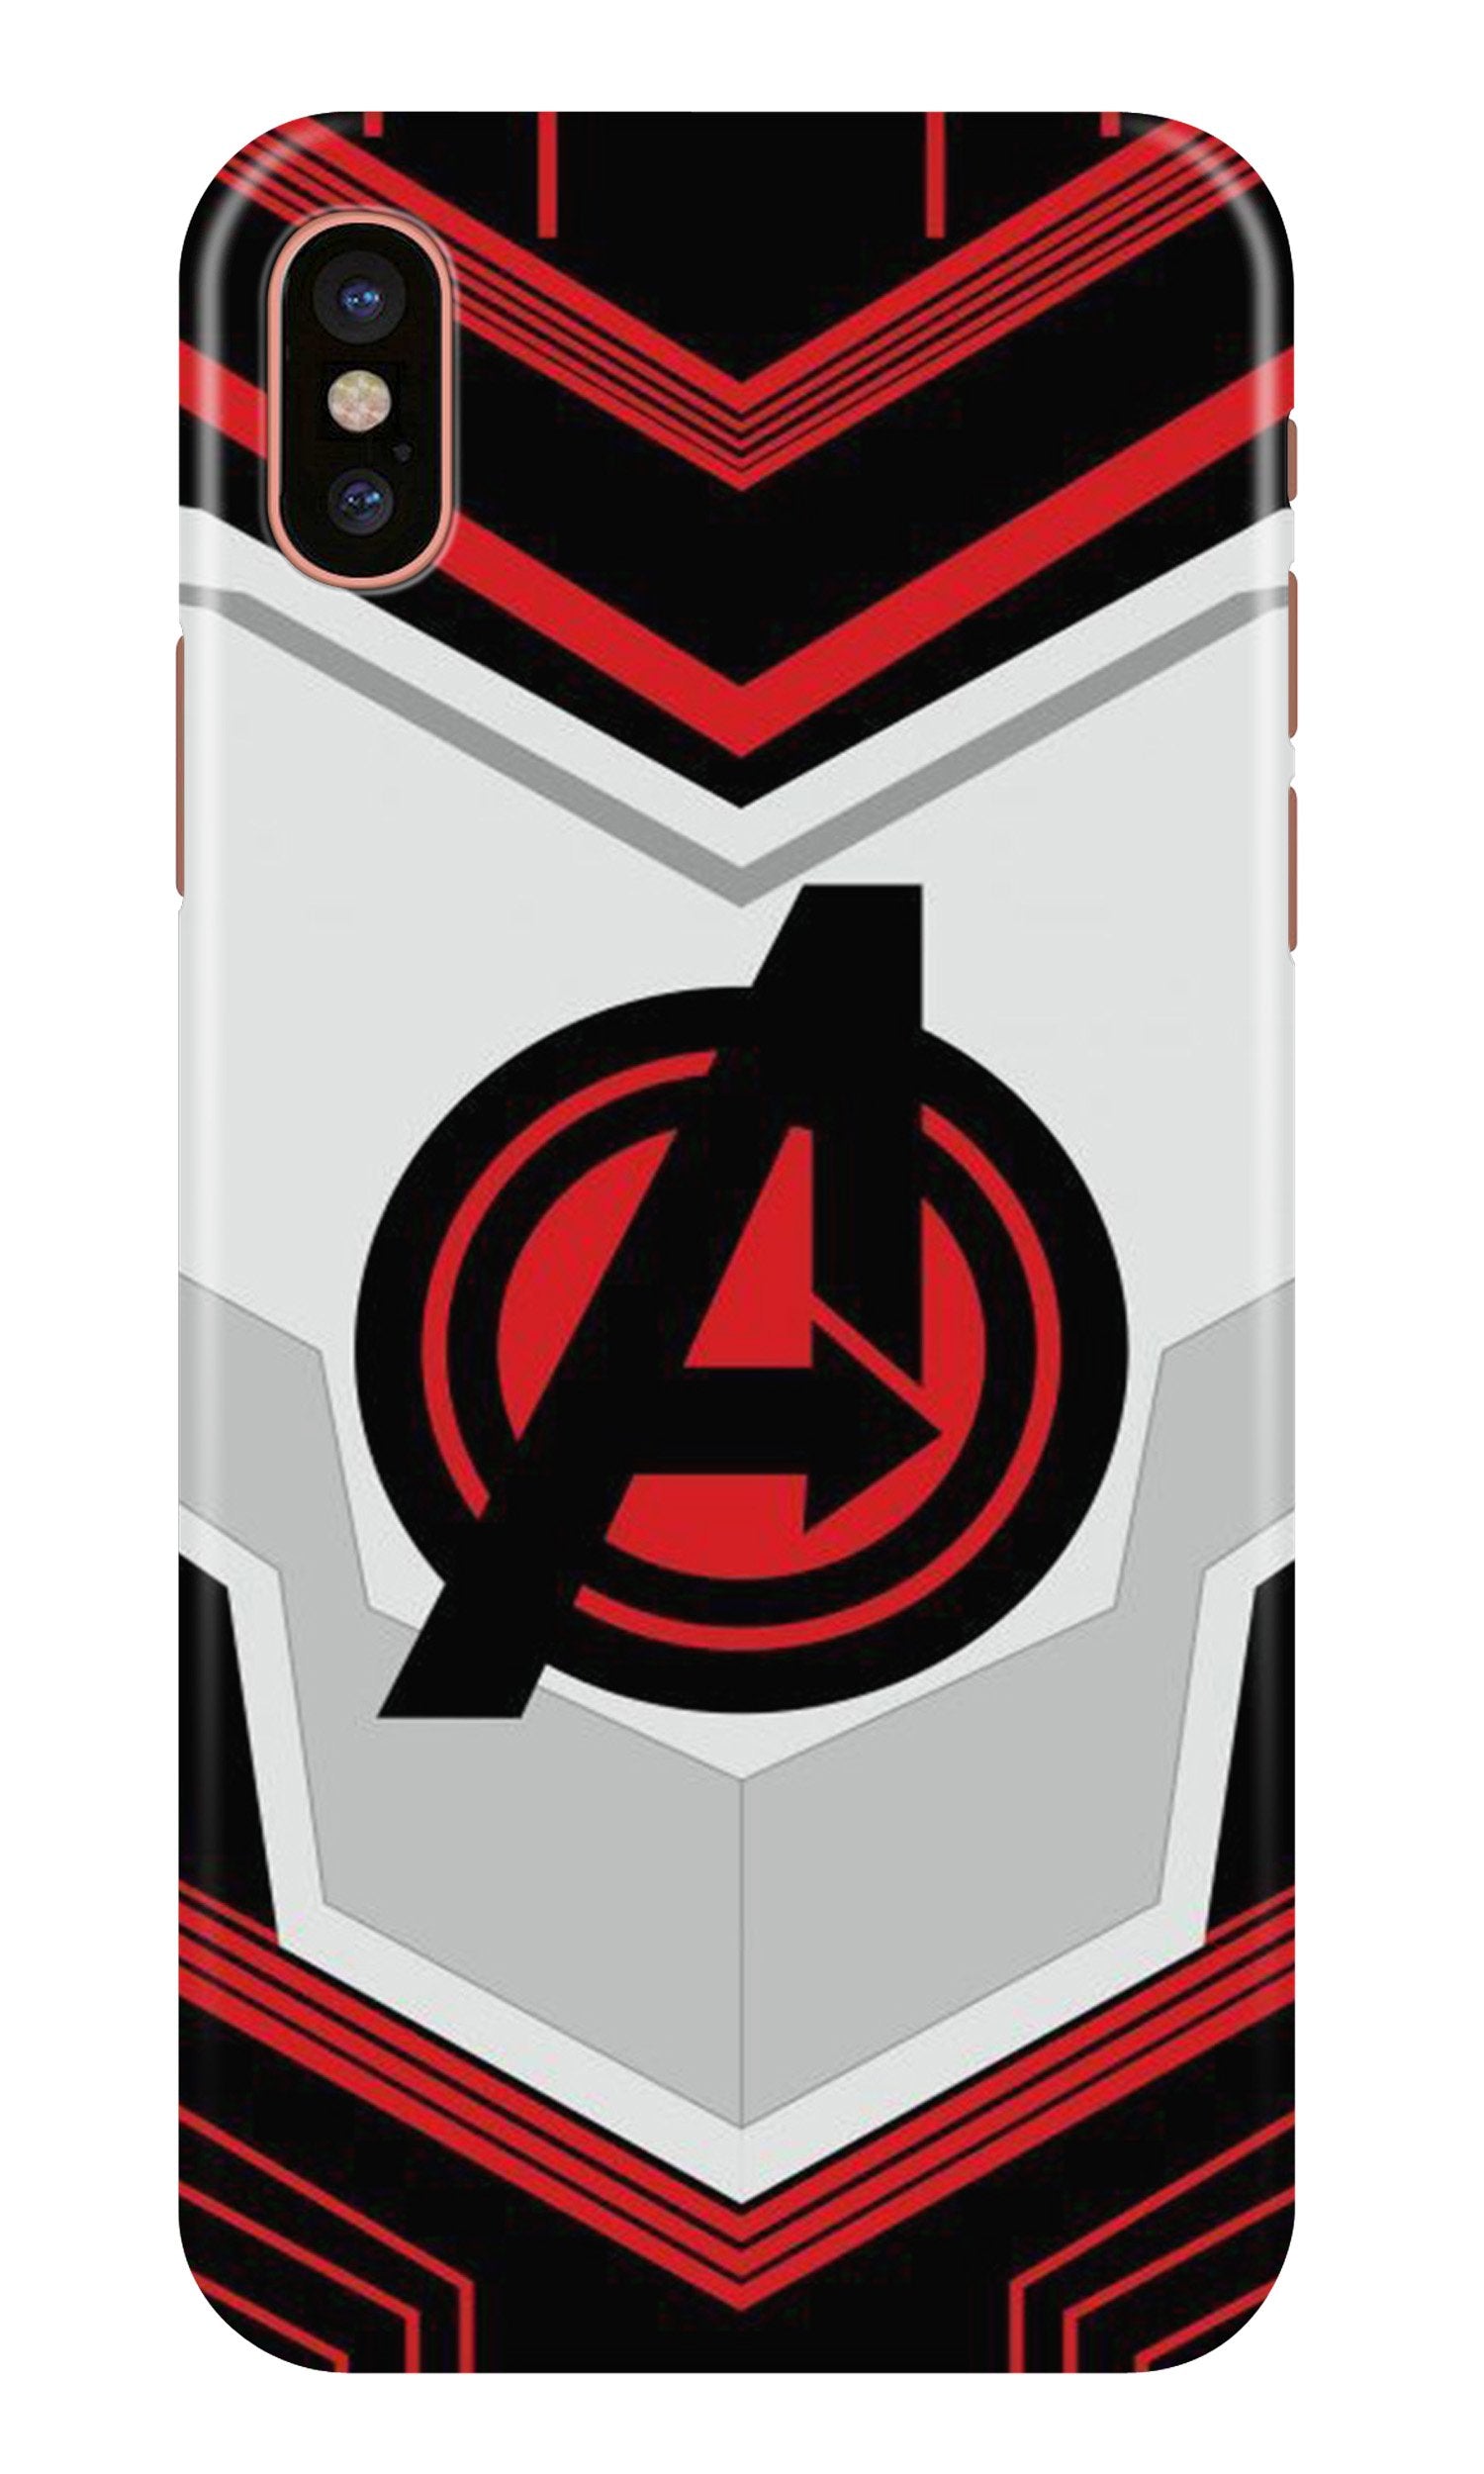 Avengers2 Case for iPhone Xr (Design No. 255)